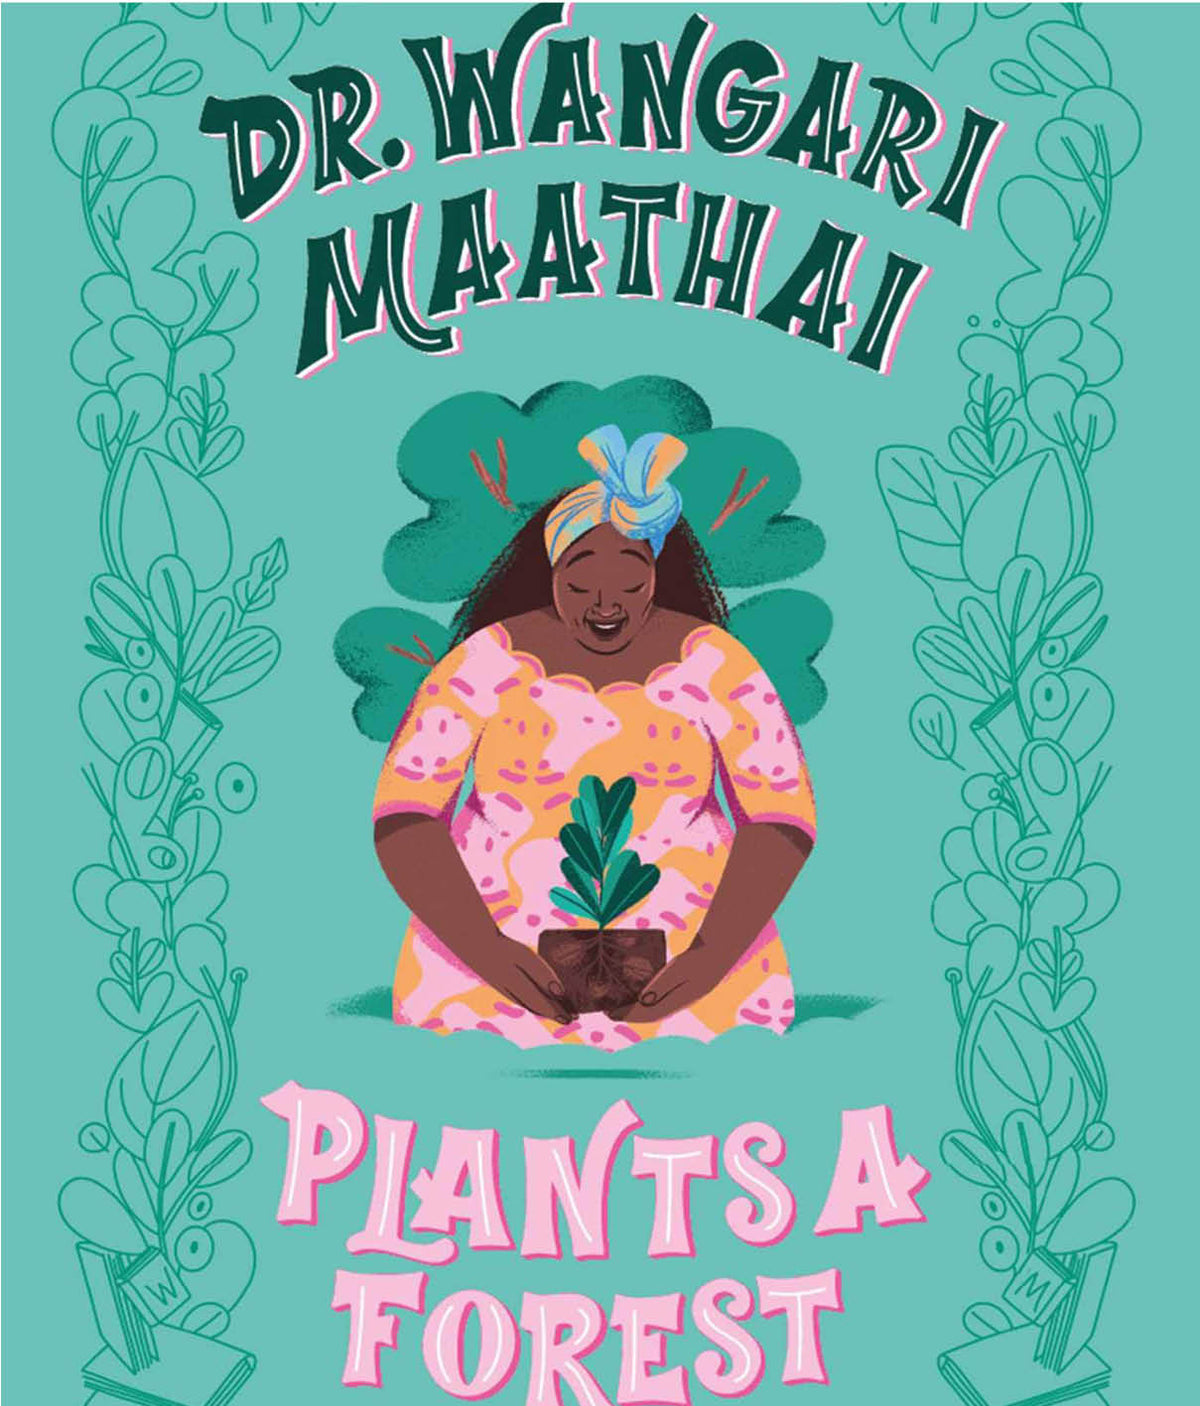 Dr. Wangari Maathai Plants a Forest by Eugenia Rebel Girls